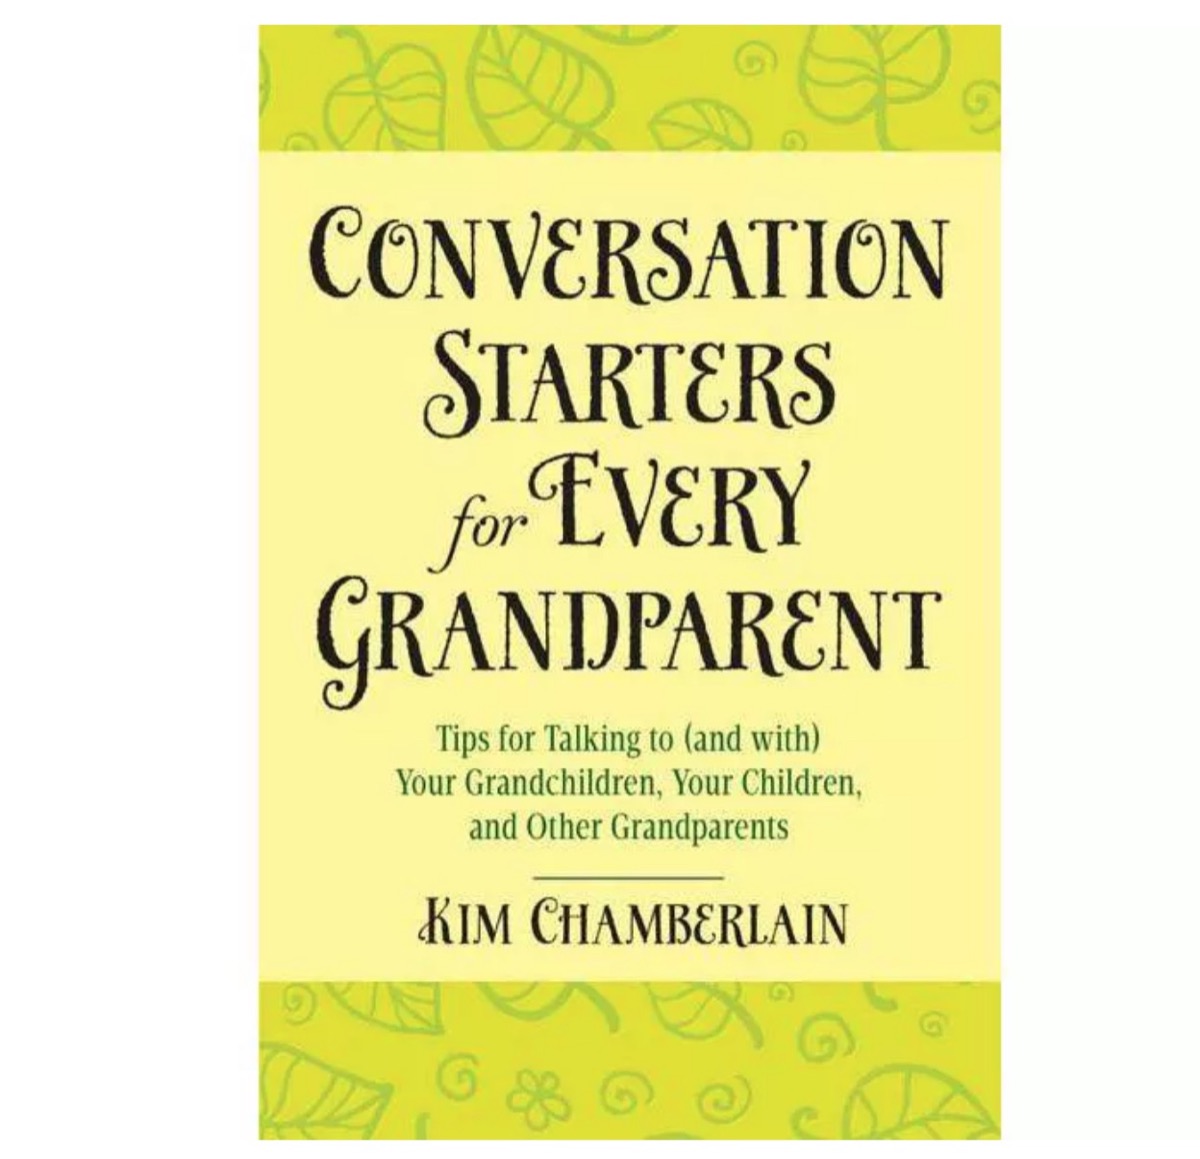 yellow book with "conversation starters for every grandparent" on it, best gifts for grandparents